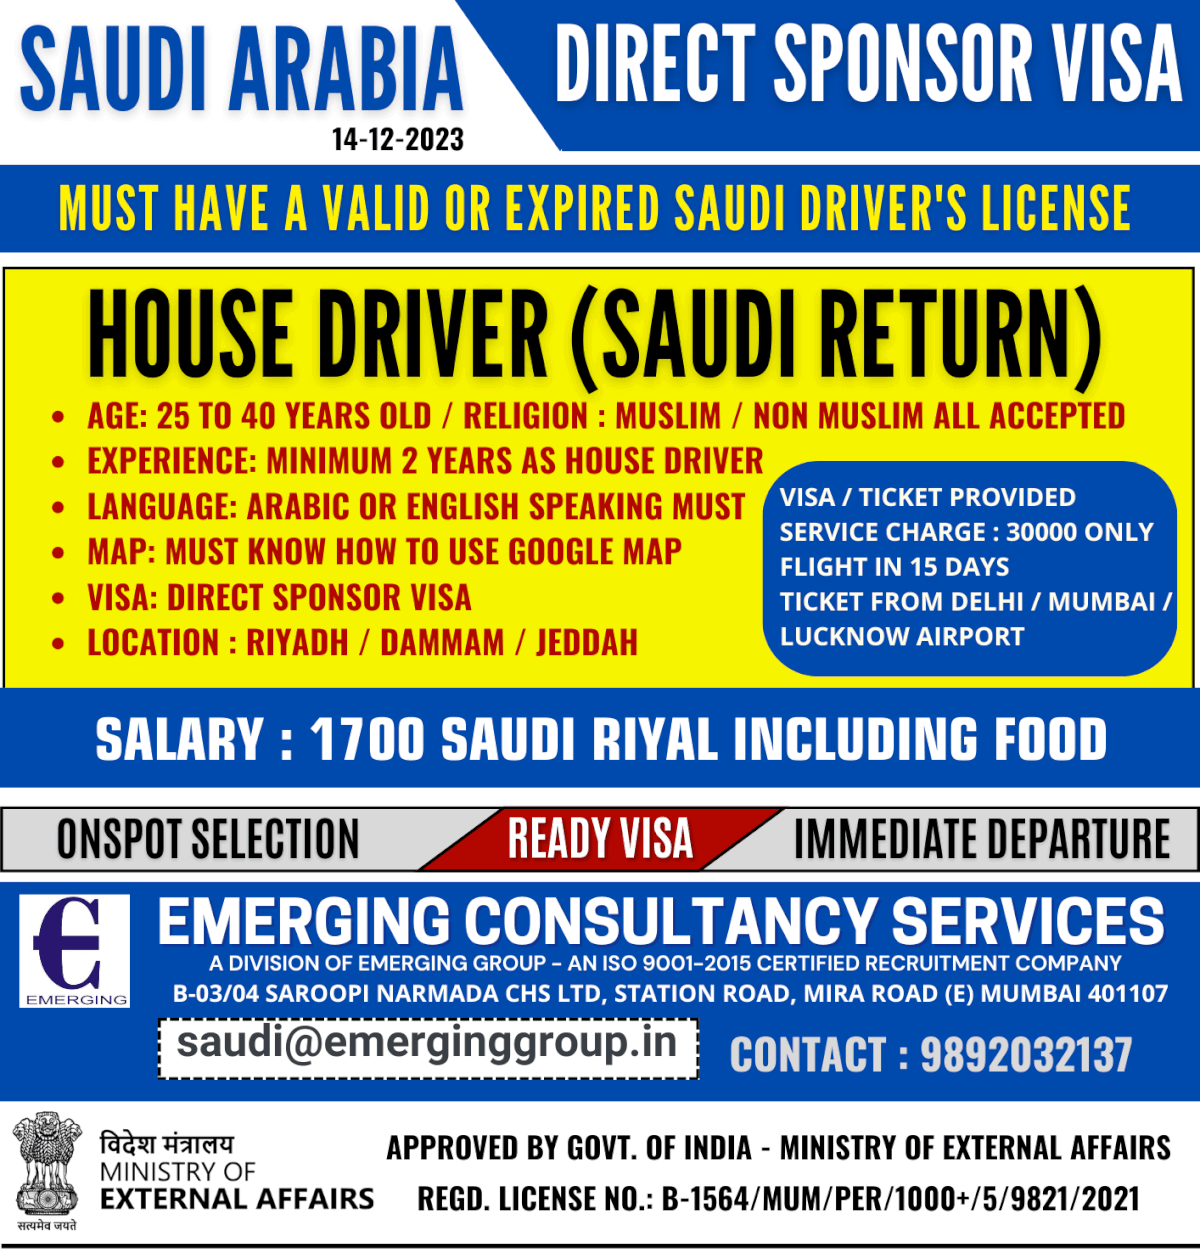 HOUSE DRIVER REQUIRED FOR SAUDI ARABIA